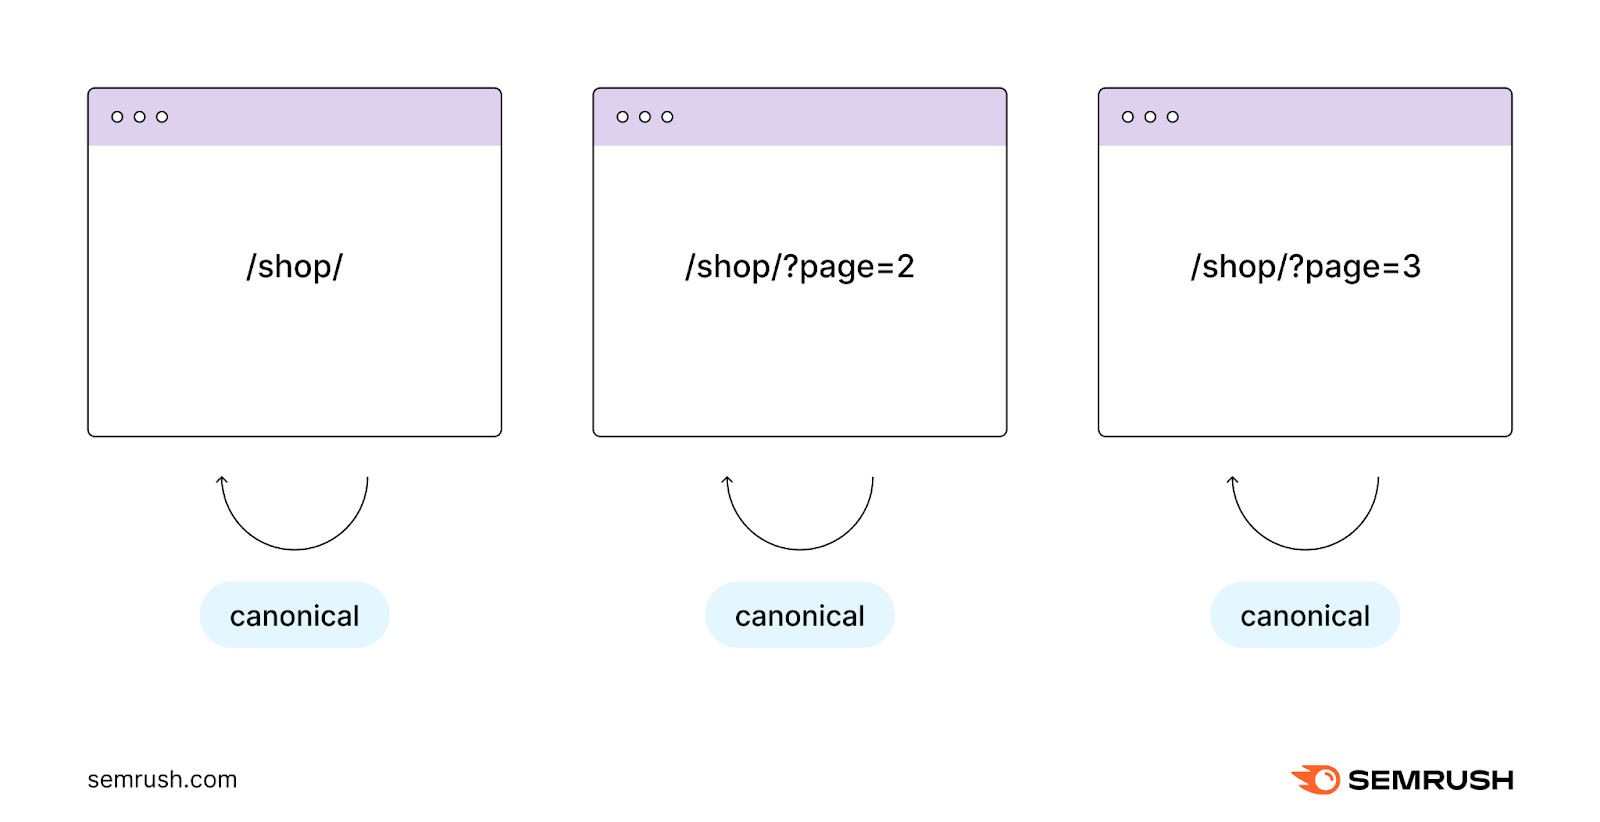 A self-referencing canonical tag in the <head> of each paginated page